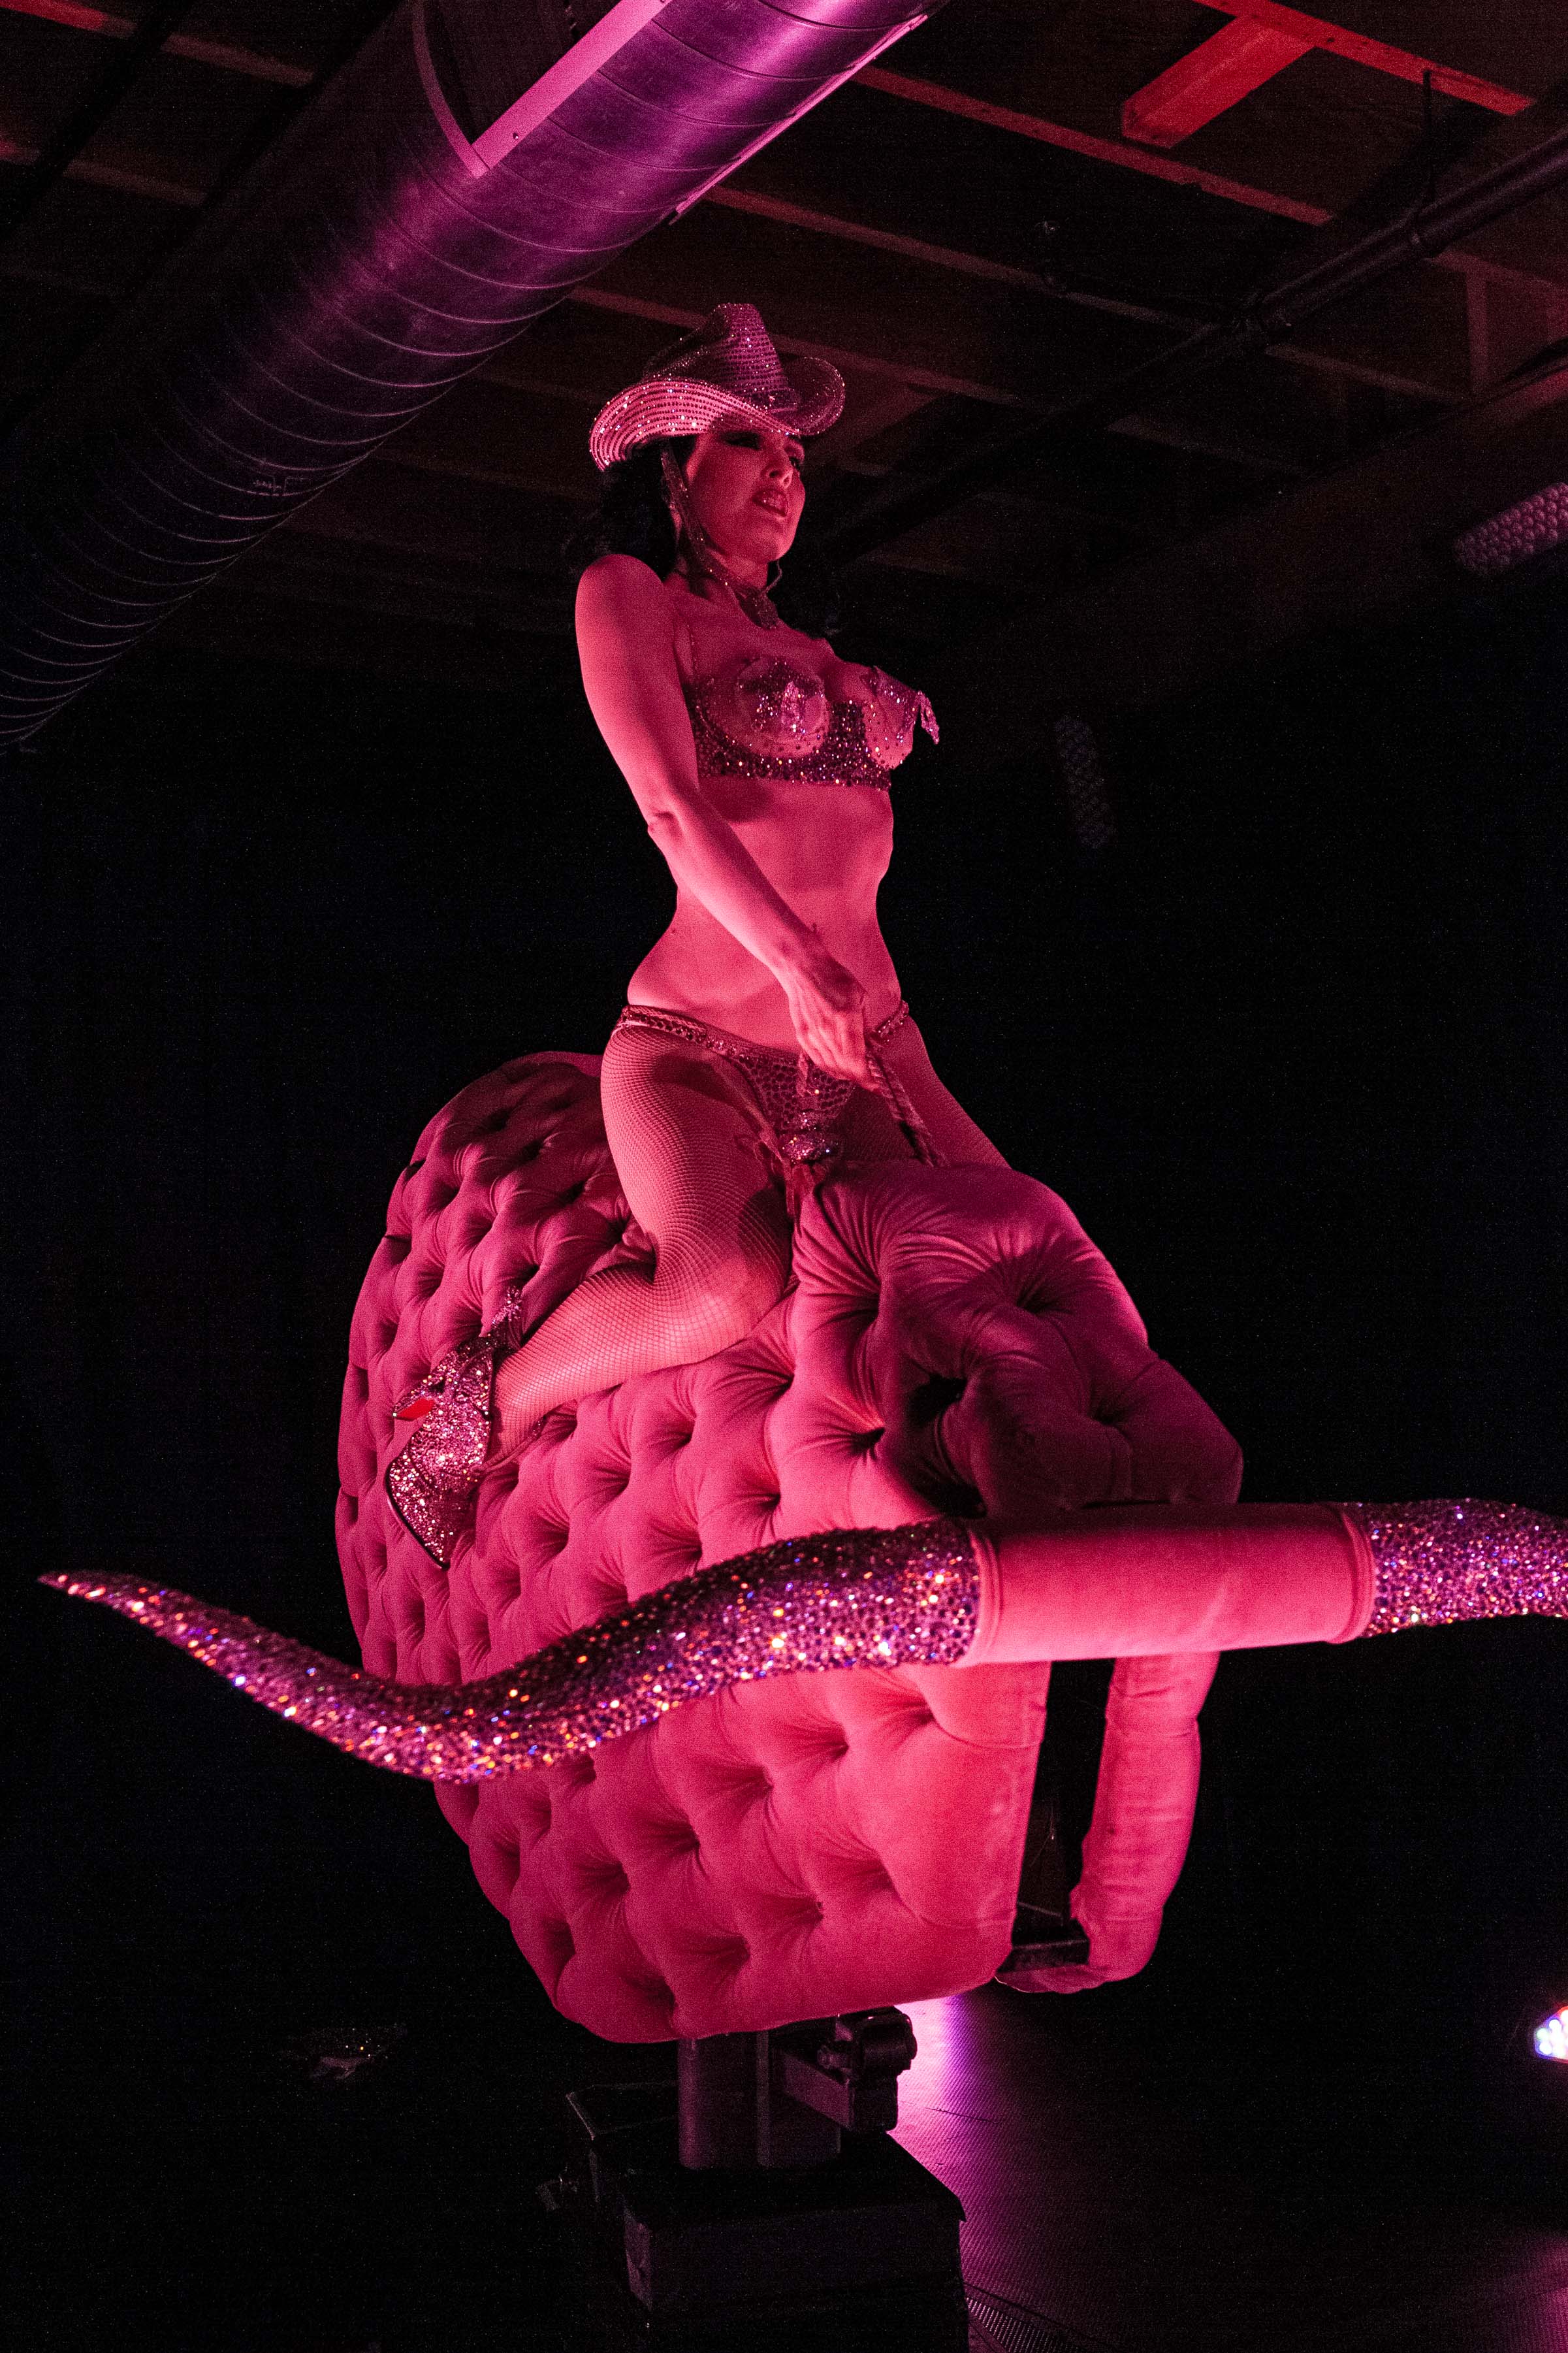 A woman in sparkly attire and a cowboy hat rides a pink upholstered mechanical bull with glittering horns, set in a dimly lit environment with purple tones.